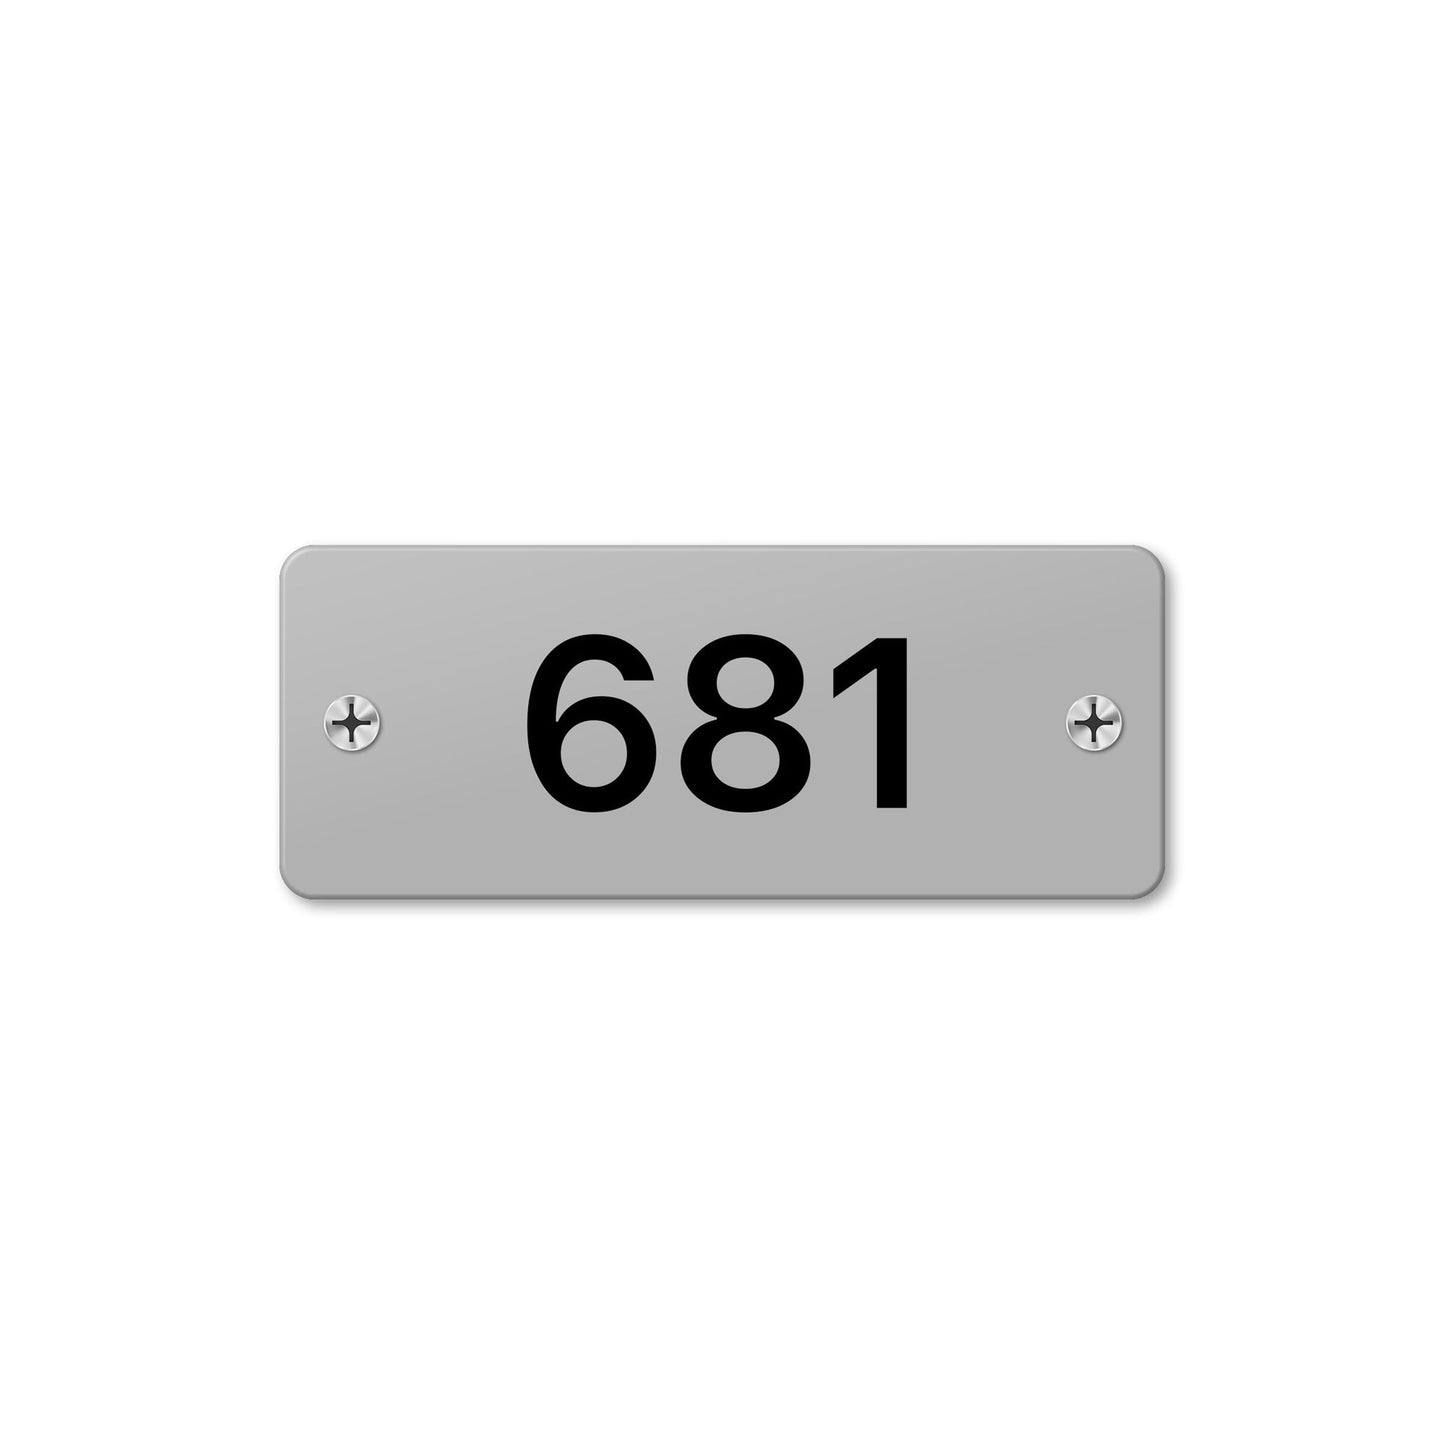 Numeral 681